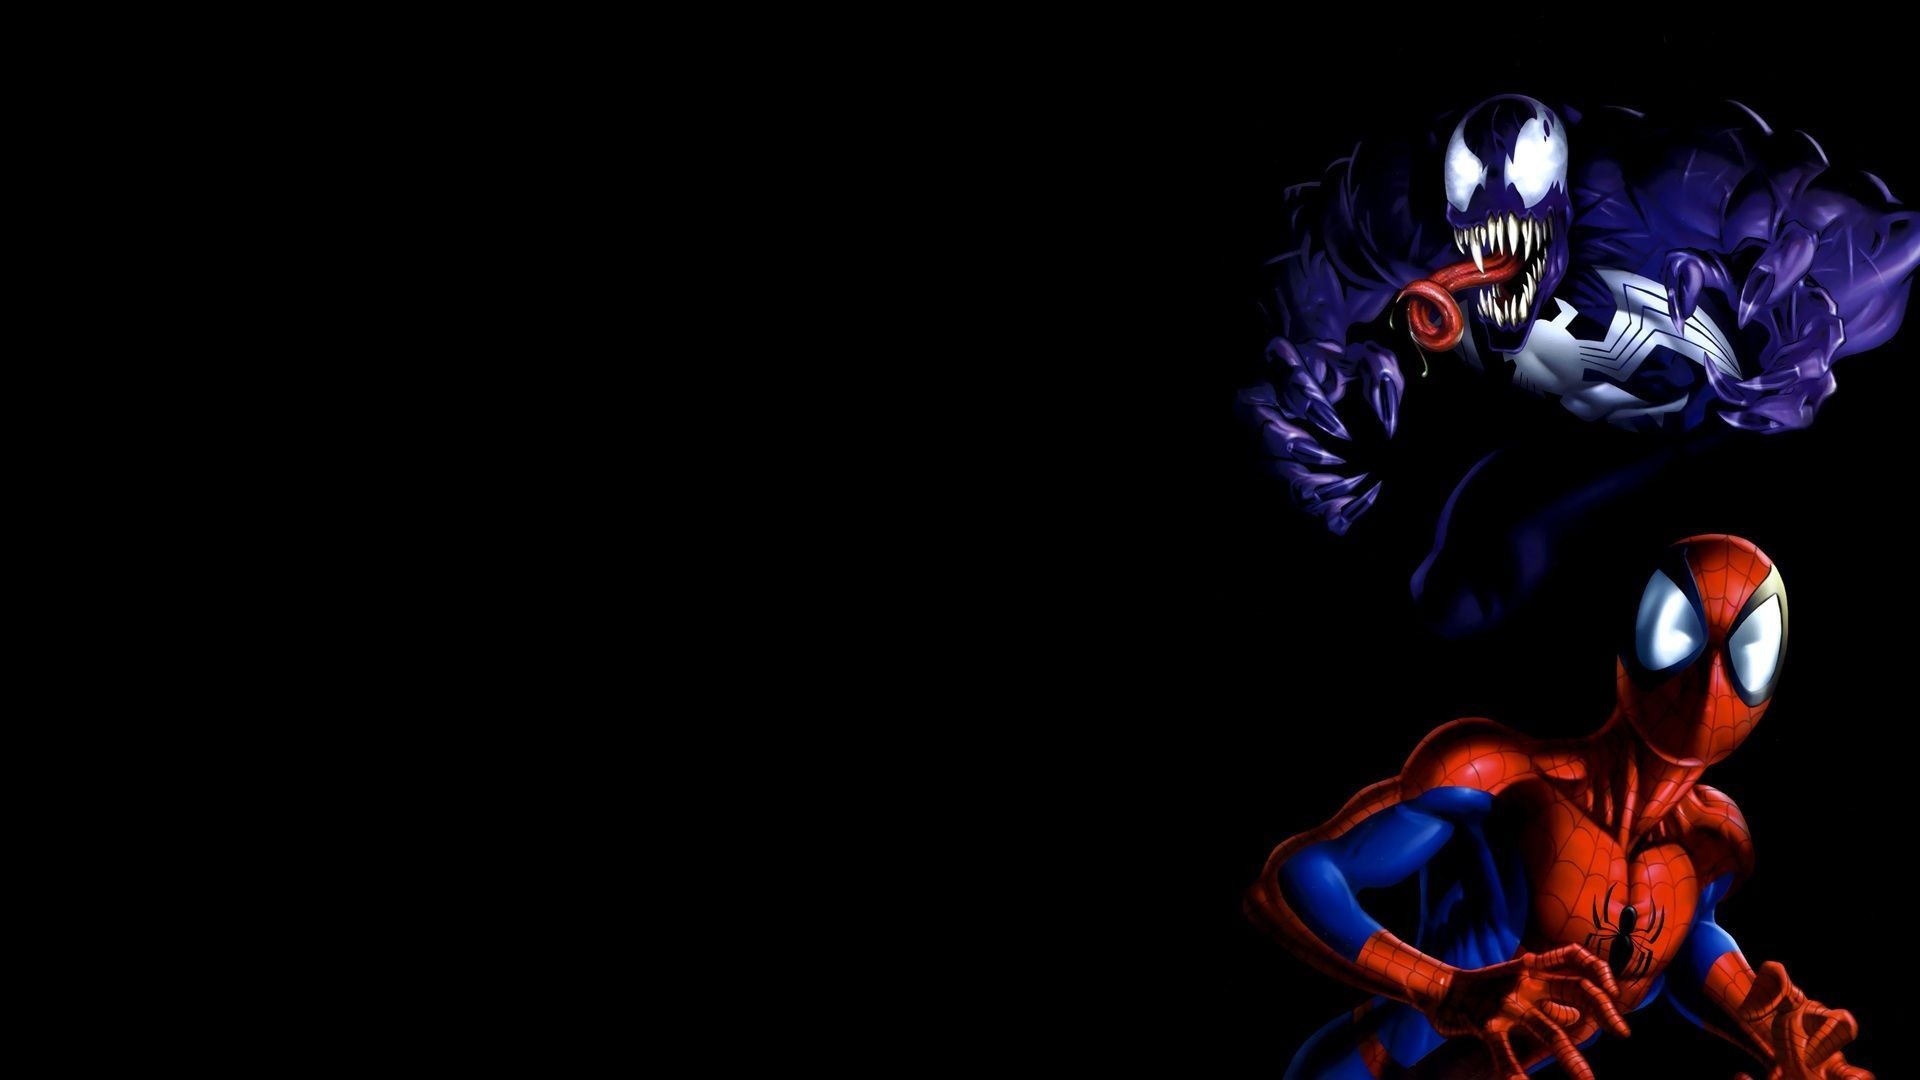 Venom Vs Carnage Wallpaper Images with HD Wallpaper Resolution px 81.34 KB Movies Thunderbolts Anti